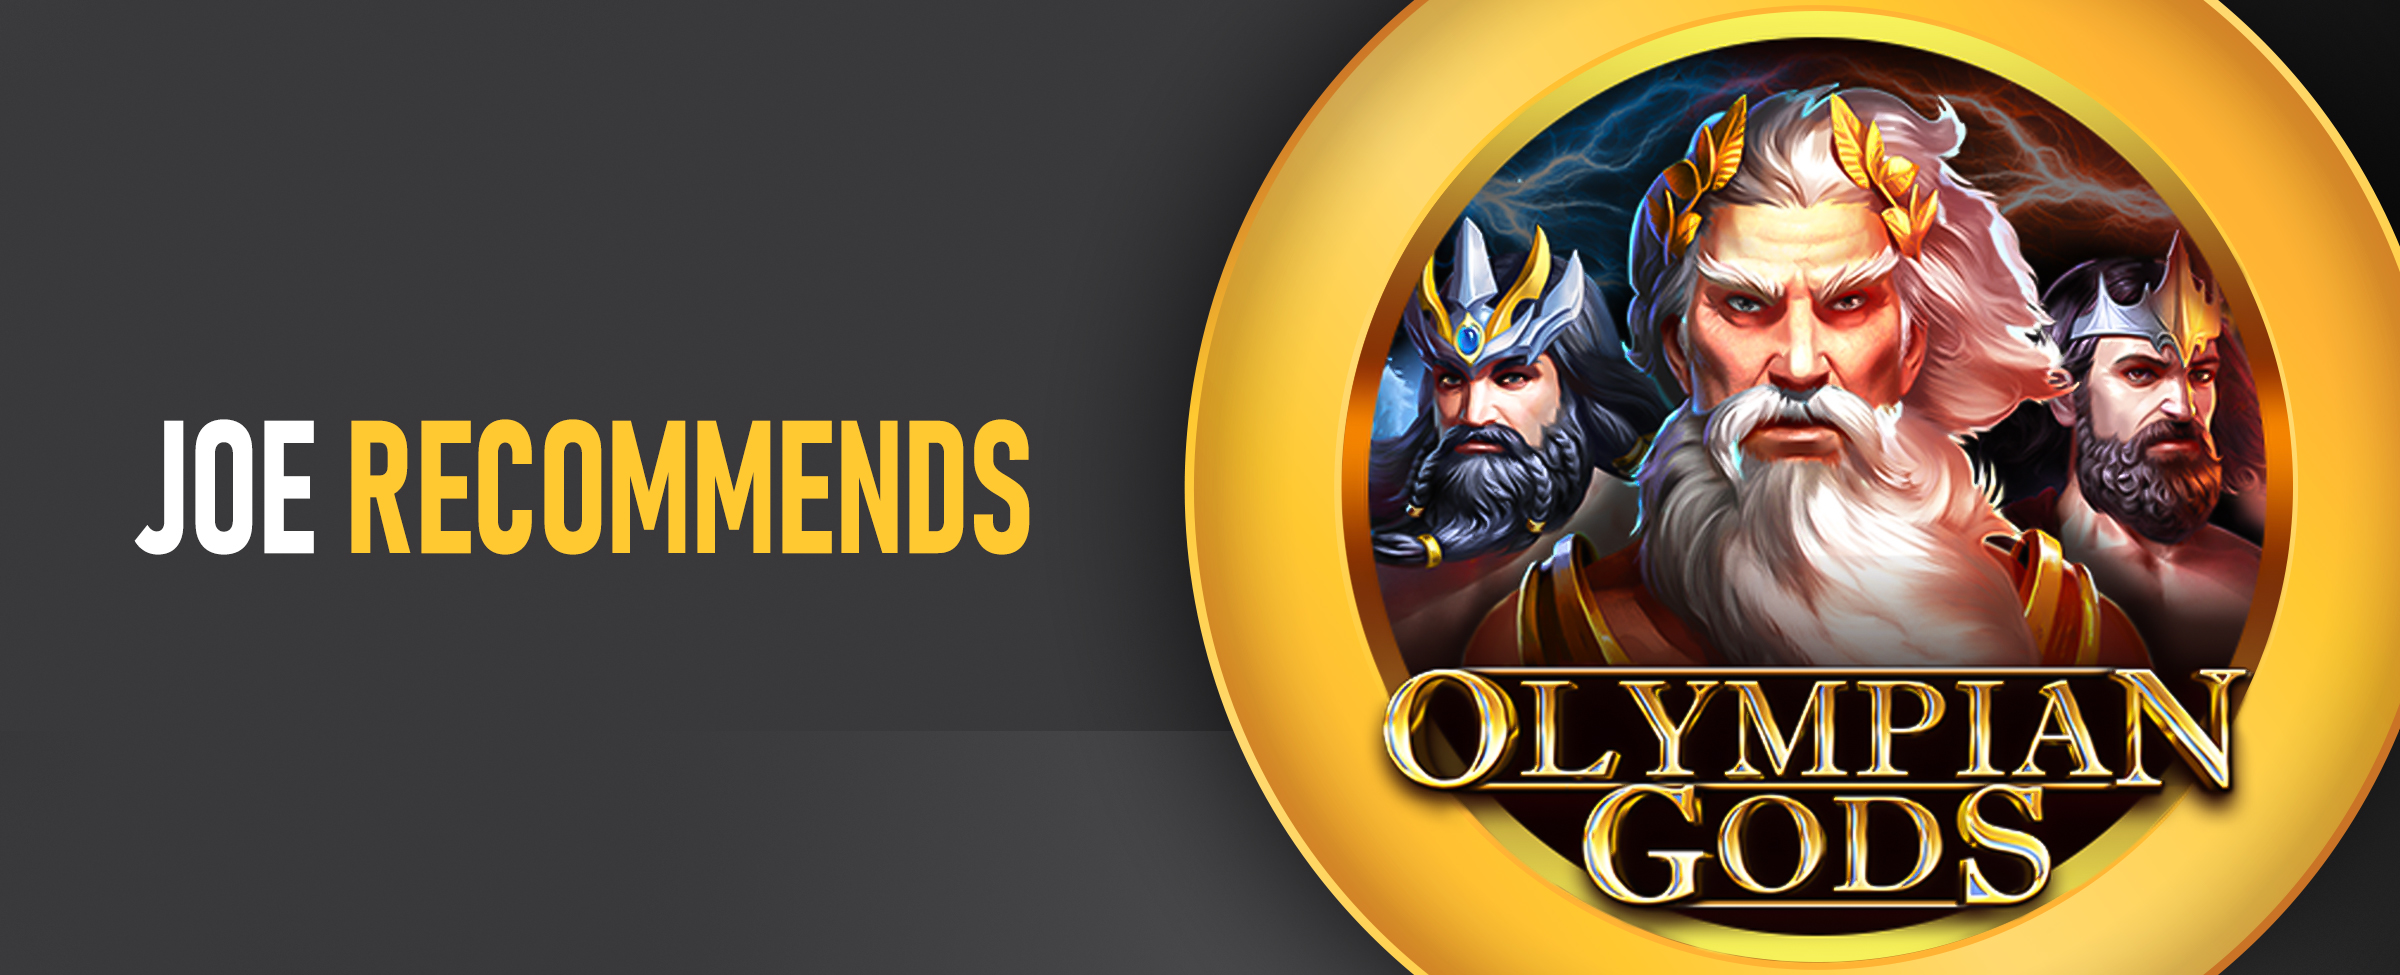 The logo for the Joe Fortune online pokie, Olympian Gods features alongside the wording ‘Joe Recommends’. On a dark background. ’